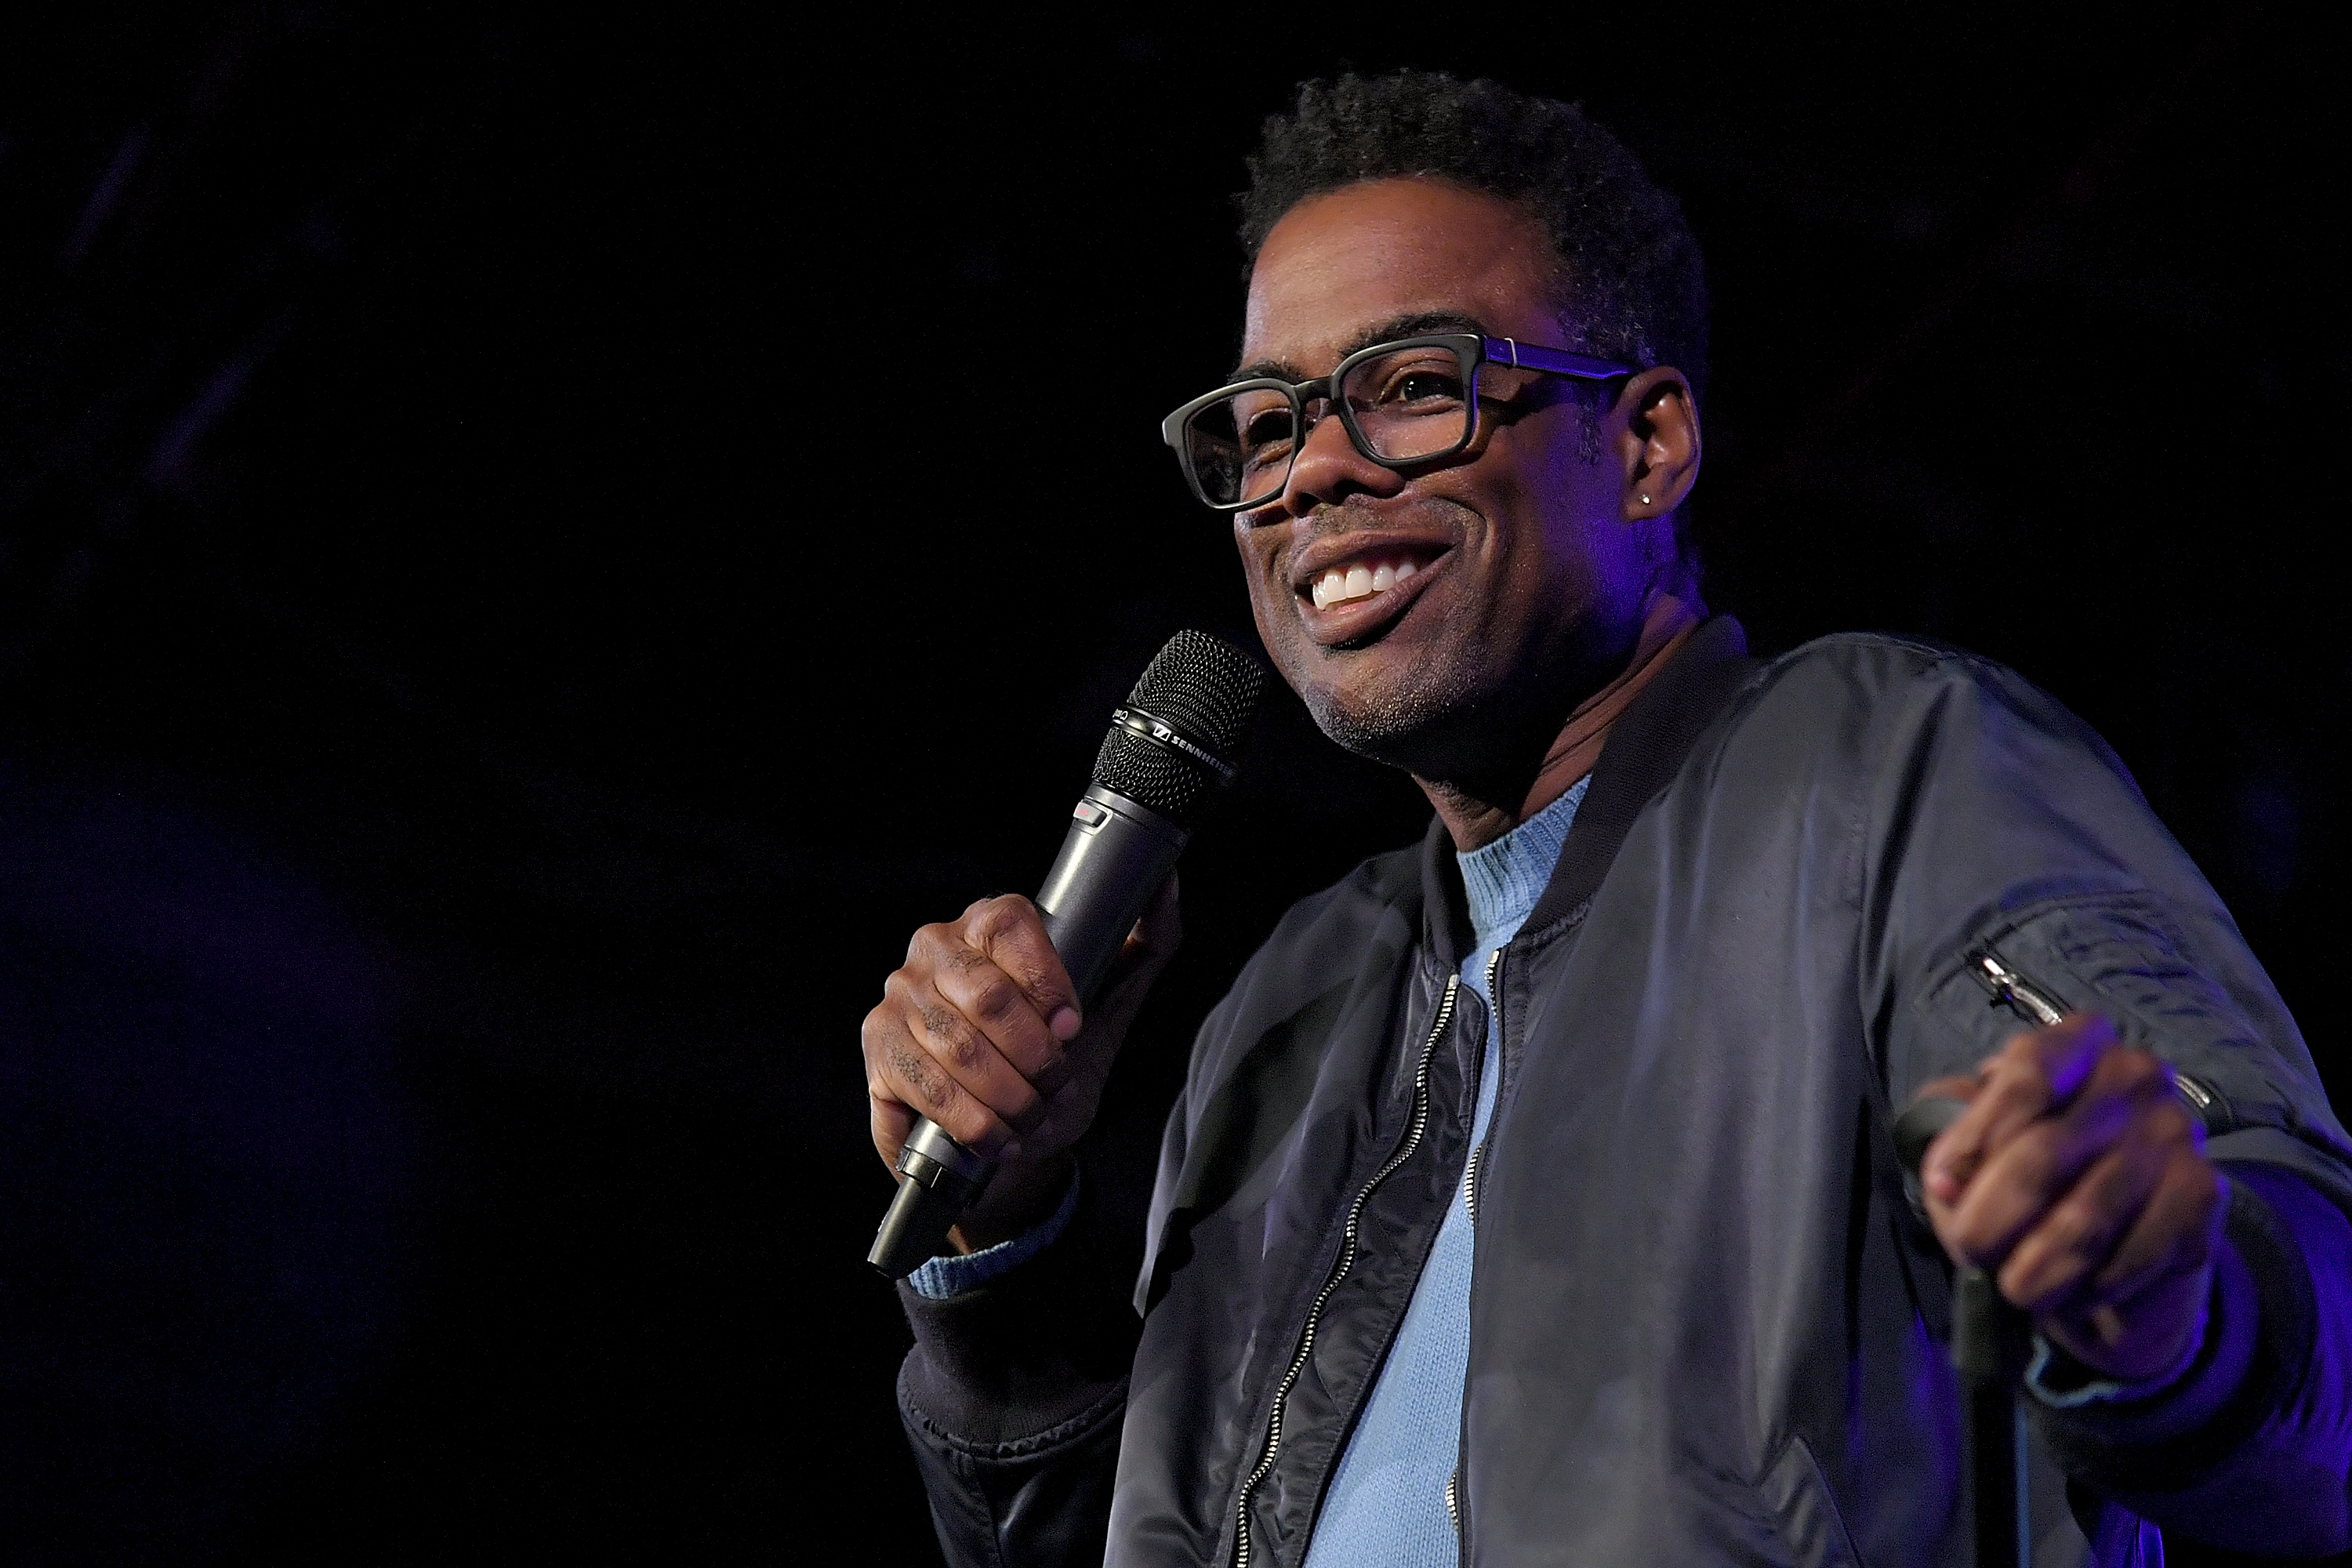 Chris Rock To Reboot “Saw” Horror Movie Franchise